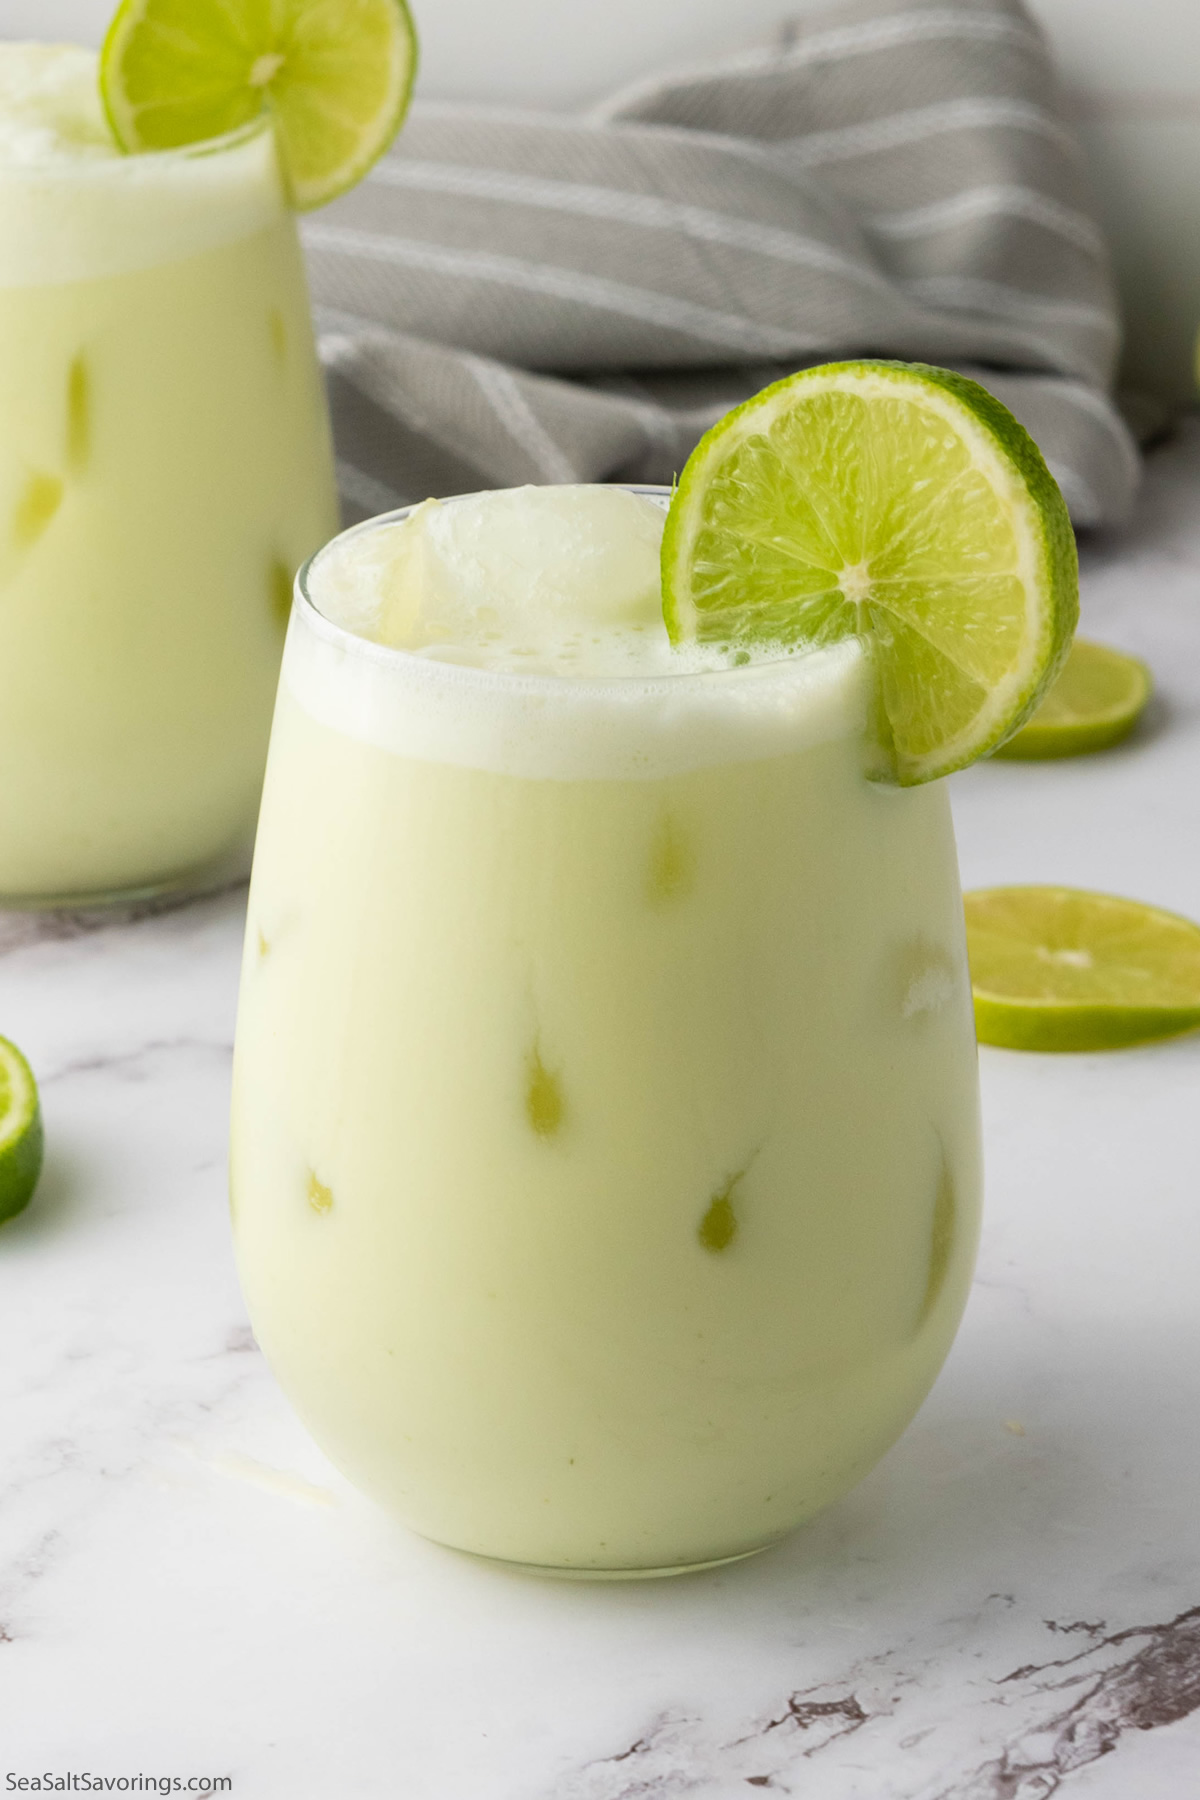 glass of limeade with a lime garnish on the rim of the glass